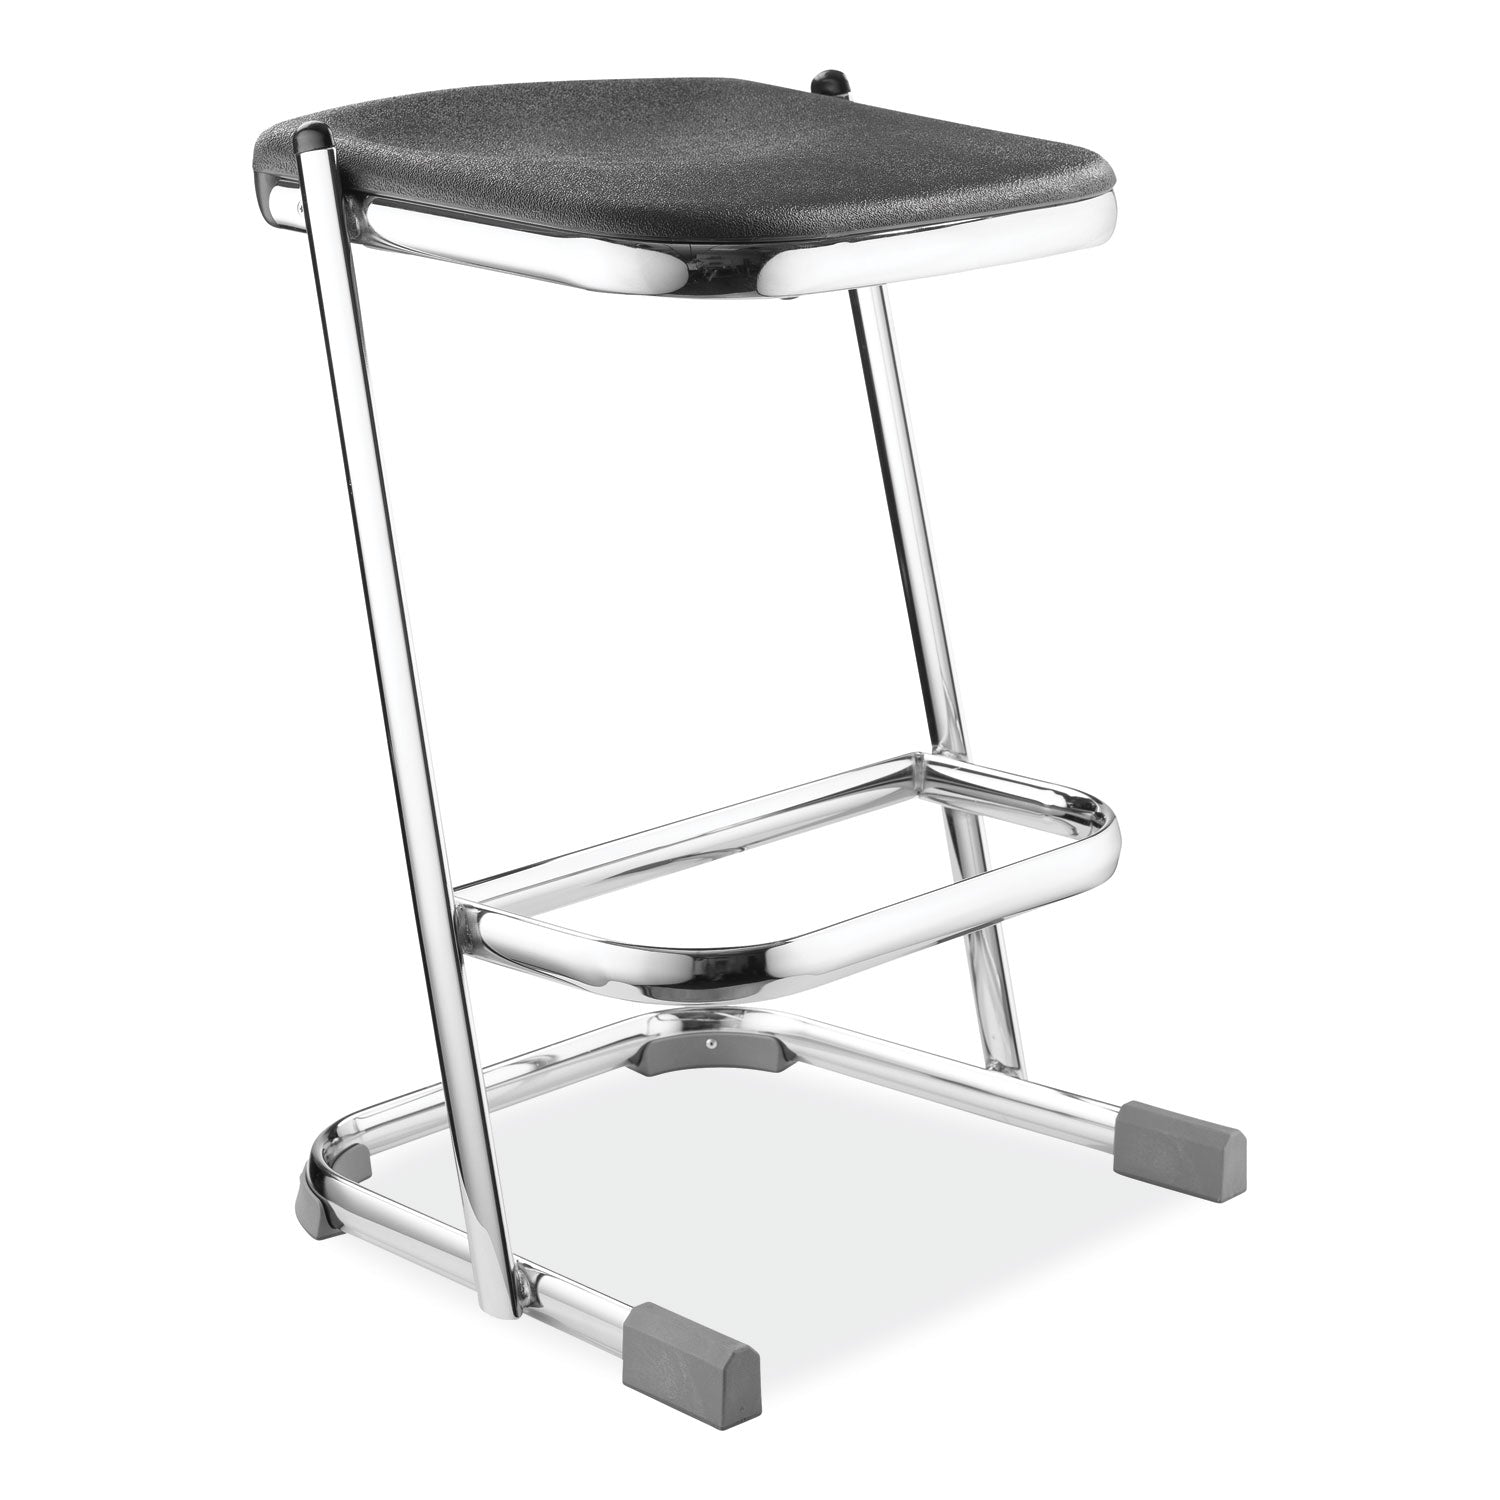 6600-series-elephant-z-stool-backless-supports-up-to-500lb-24-seat-height-black-seat-chrome-frameships-in-1-3-bus-days_nps6624 - 1